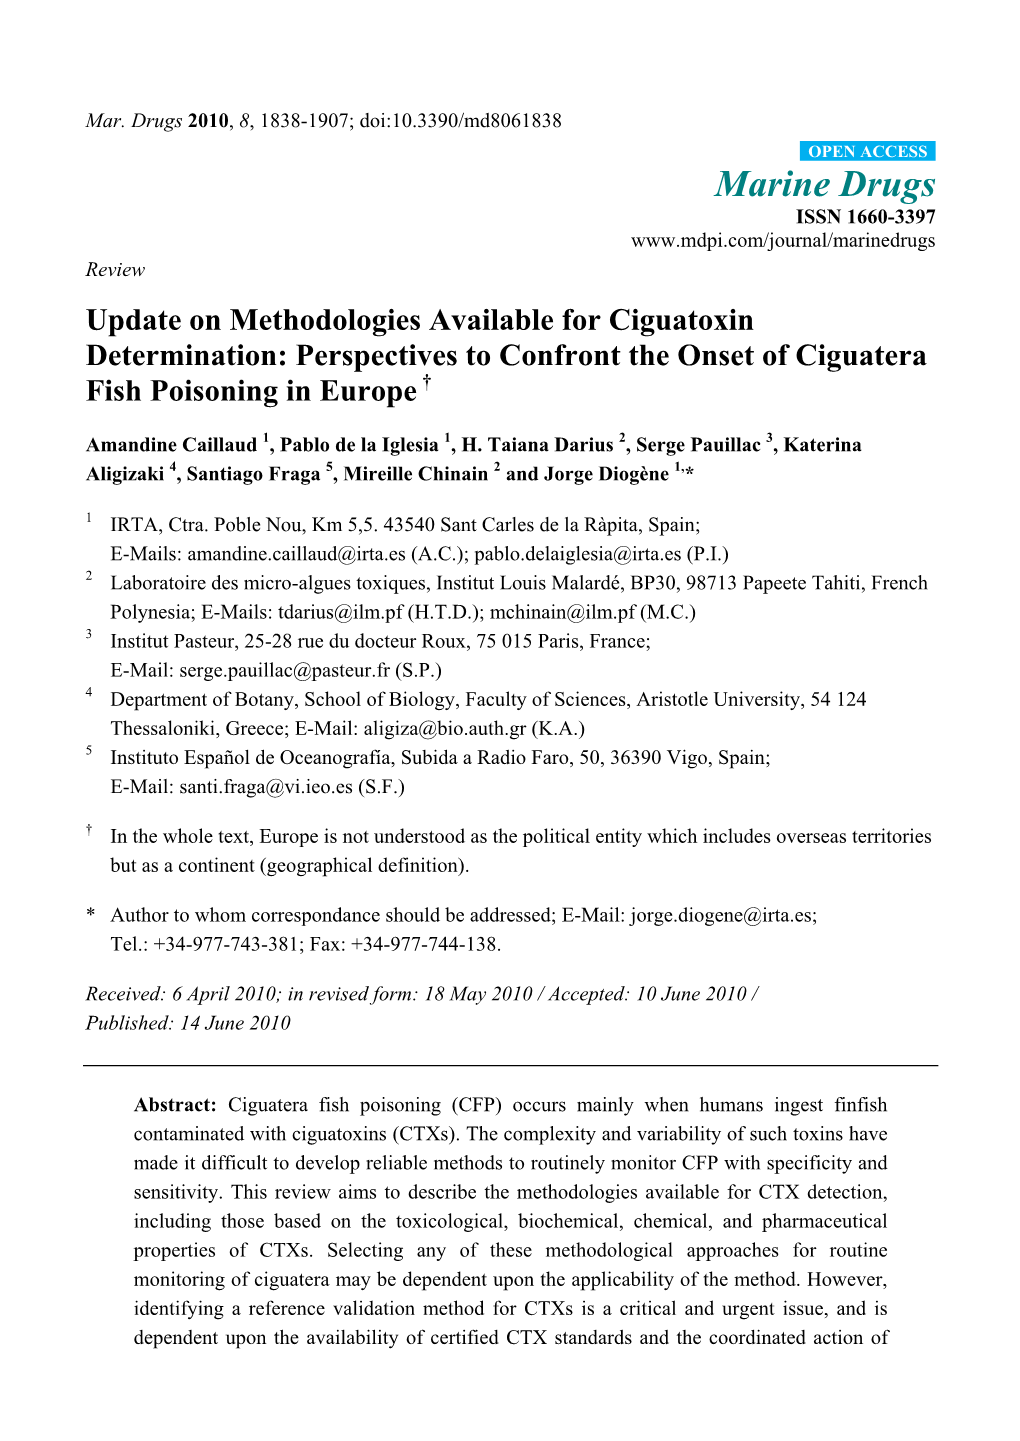 Update on Methodologies Available for Ciguatoxin Determination: Perspectives to Confront the Onset of Ciguatera Fish Poisoning in Europe †